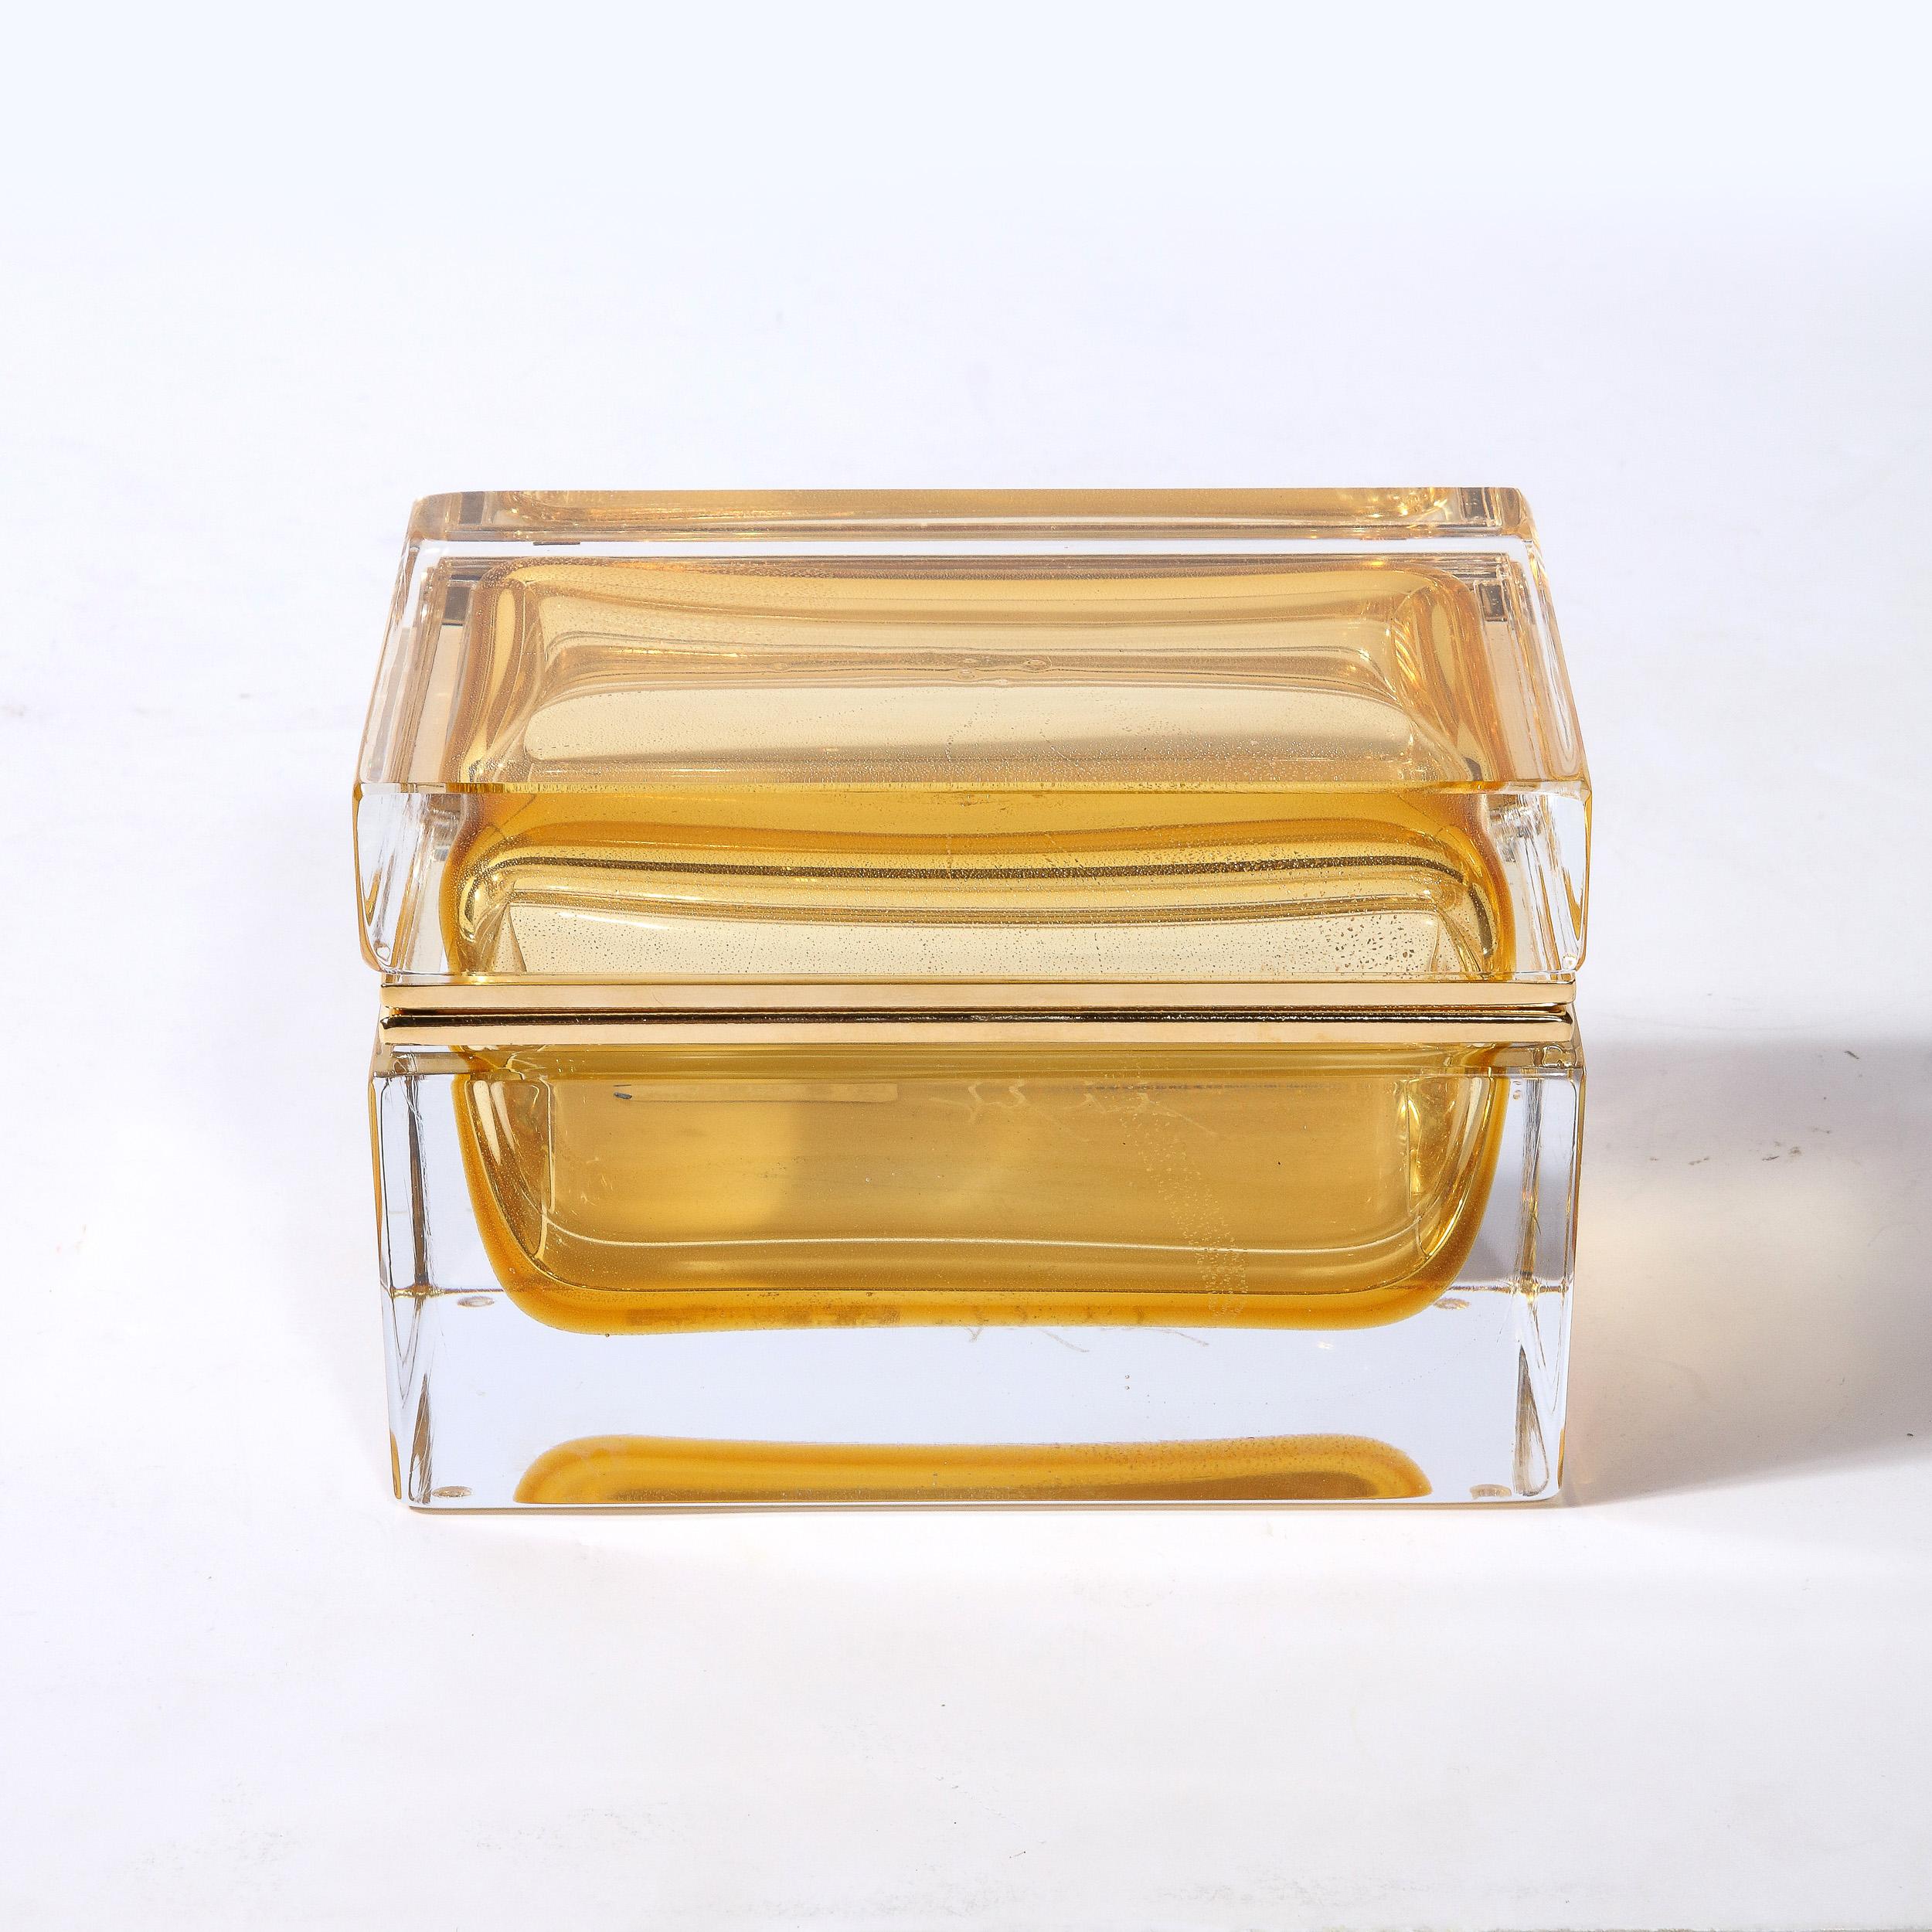 This beautiful modernist decorative box was realized in Murano, Italy- the island off the coast of Venice renowned for centuries for its superlative glass production. It features a volumetric rectangular body with a translucent Murano glass exterior